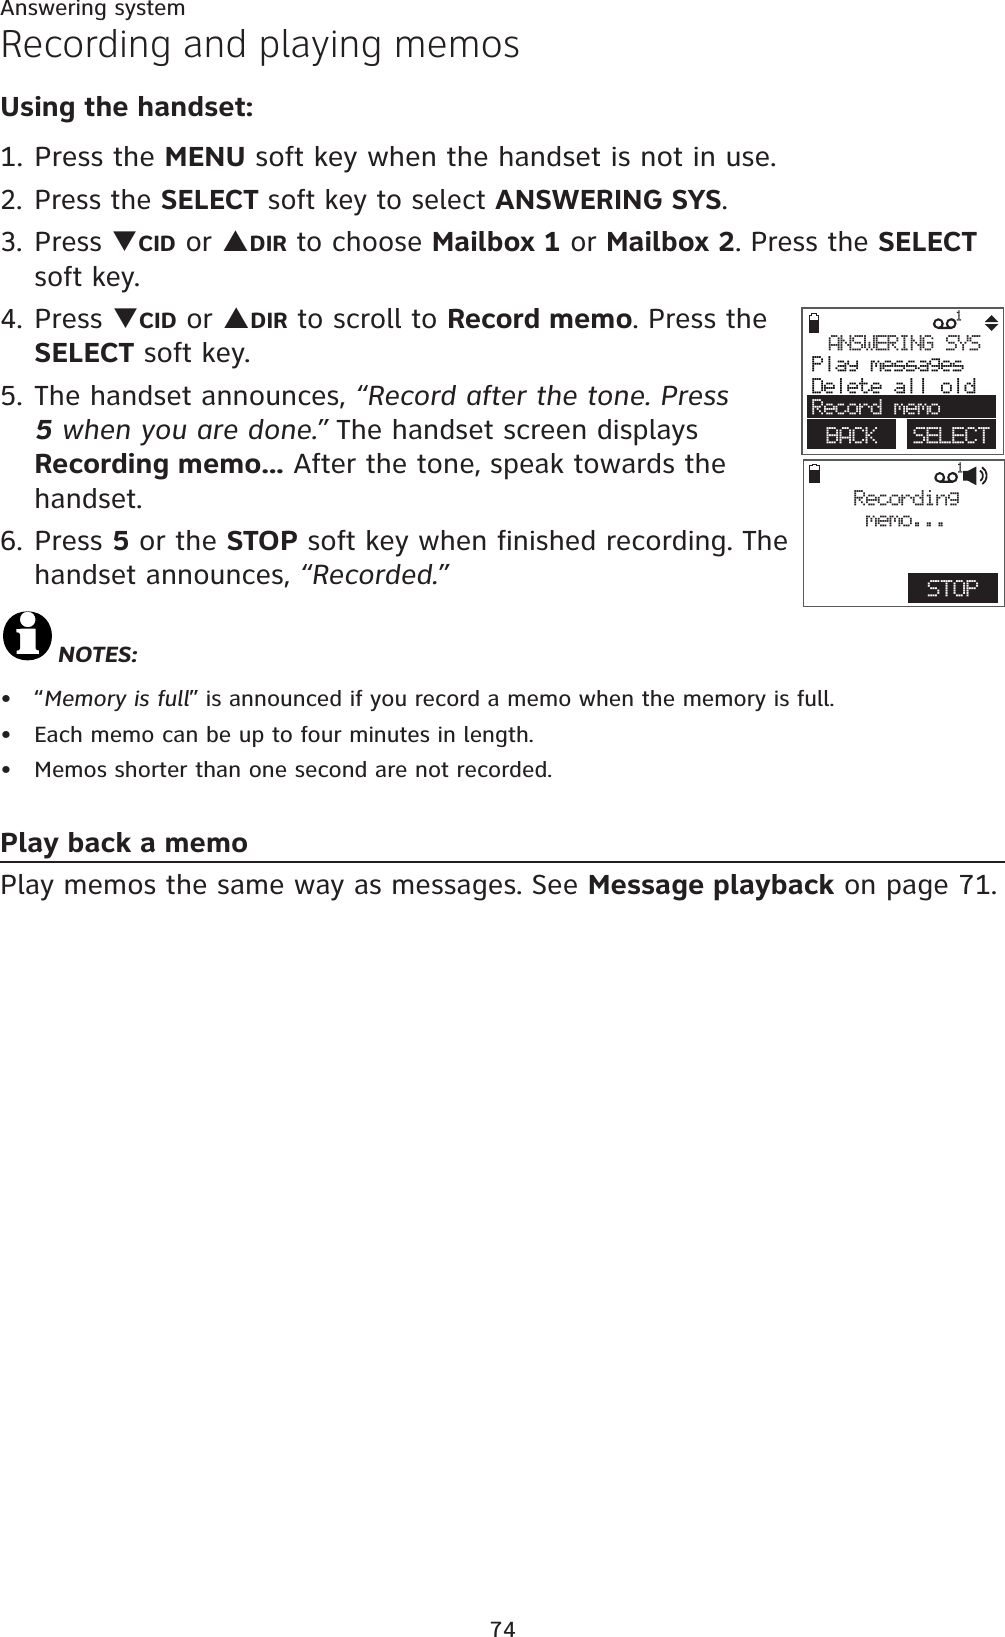 74Answering systemRecording and playing memosUsing the handset:1. Press the MENU soft key when the handset is not in use.2. Press the SELECT soft key to select ANSWERING SYS.3. Press TCID or SDIR to choose Mailbox 1 or Mailbox 2. Press the SELECTsoft key.4. Press TCID or SDIR to scroll to Record memo. Press the SELECT soft key. 5. The handset announces, “Record after the tone. Press 5 when you are done.” The handset screen displays Recording memo... After the tone, speak towards the handset.6. Press 5 or the STOP soft key when finished recording. The handset announces, “Recorded.”NOTES:“Memory is full” is announced if you record a memo when the memory is full.Each memo can be up to four minutes in length.Memos shorter than one second are not recorded.Play back a memoPlay memos the same way as messages. See Message playback on page 71.•••1BACK    SELECTANSWERING SYSPlay messagesDelete all oldRecord memo1STOPRecordingmemo...